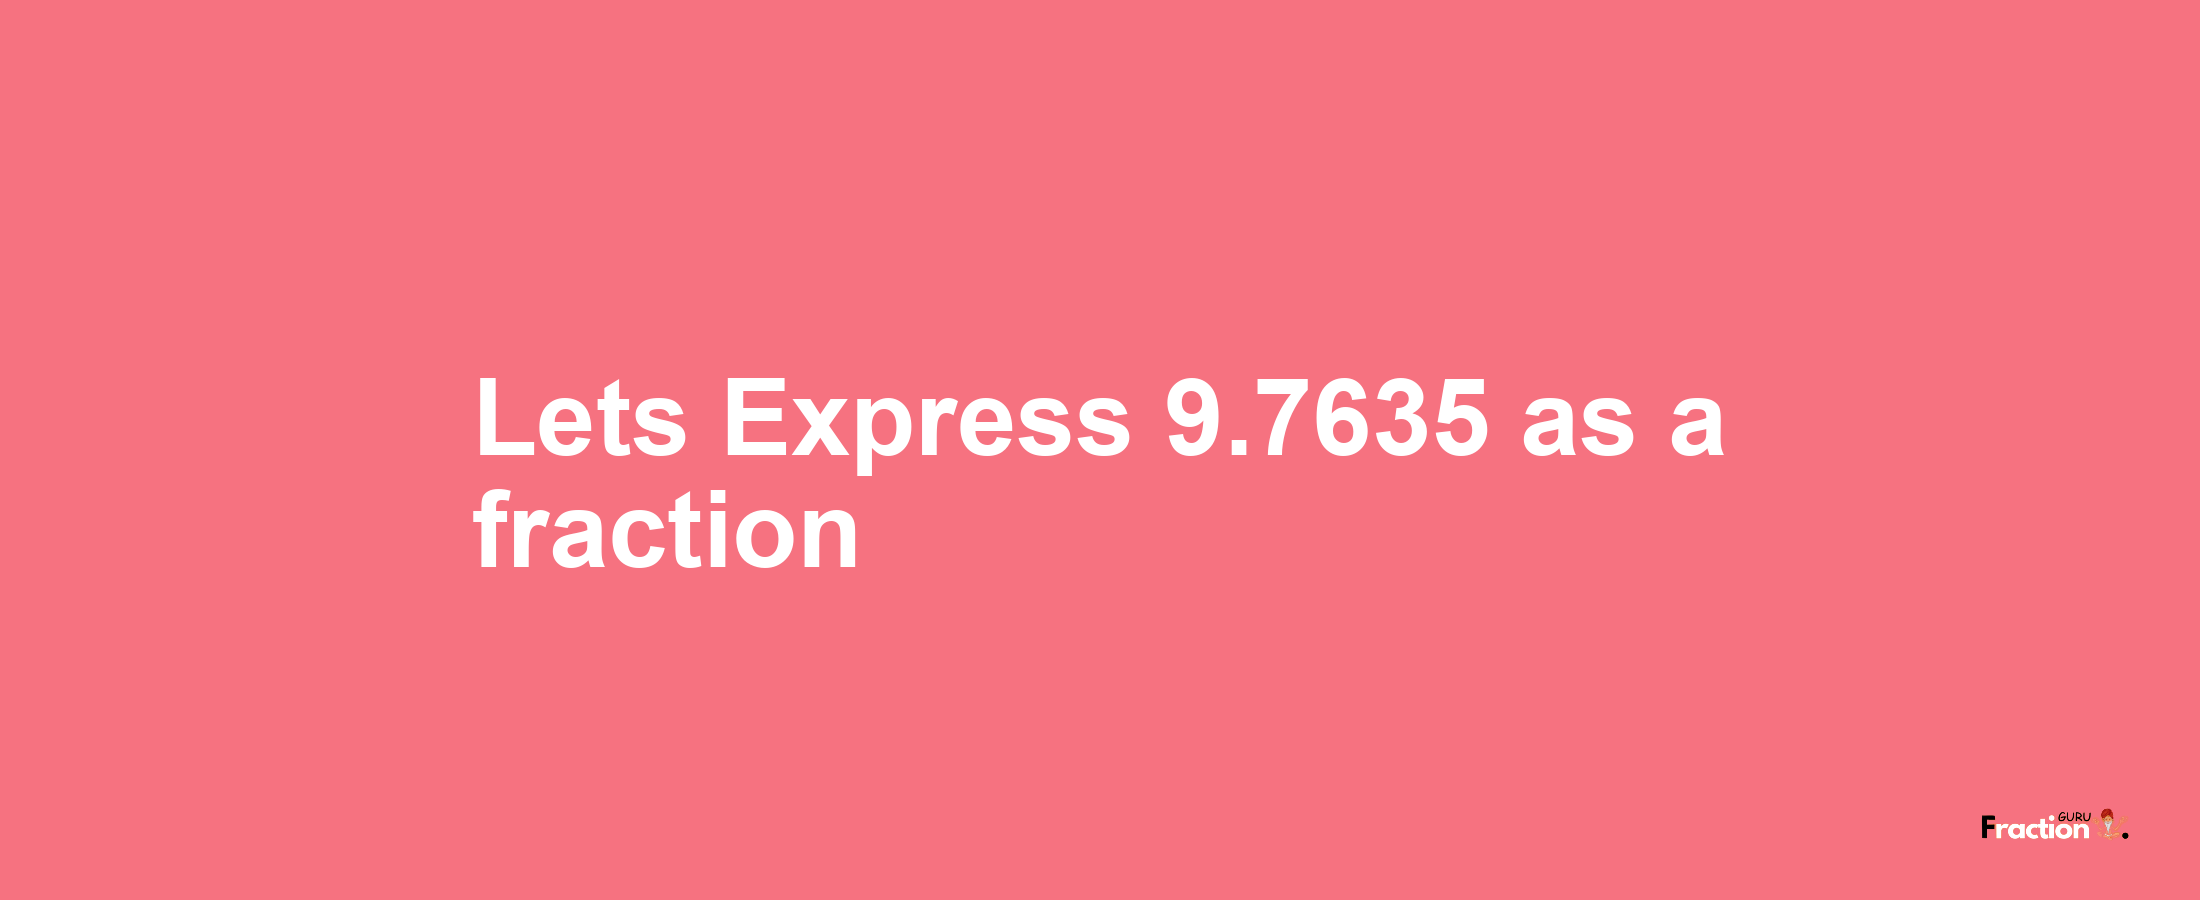 Lets Express 9.7635 as afraction